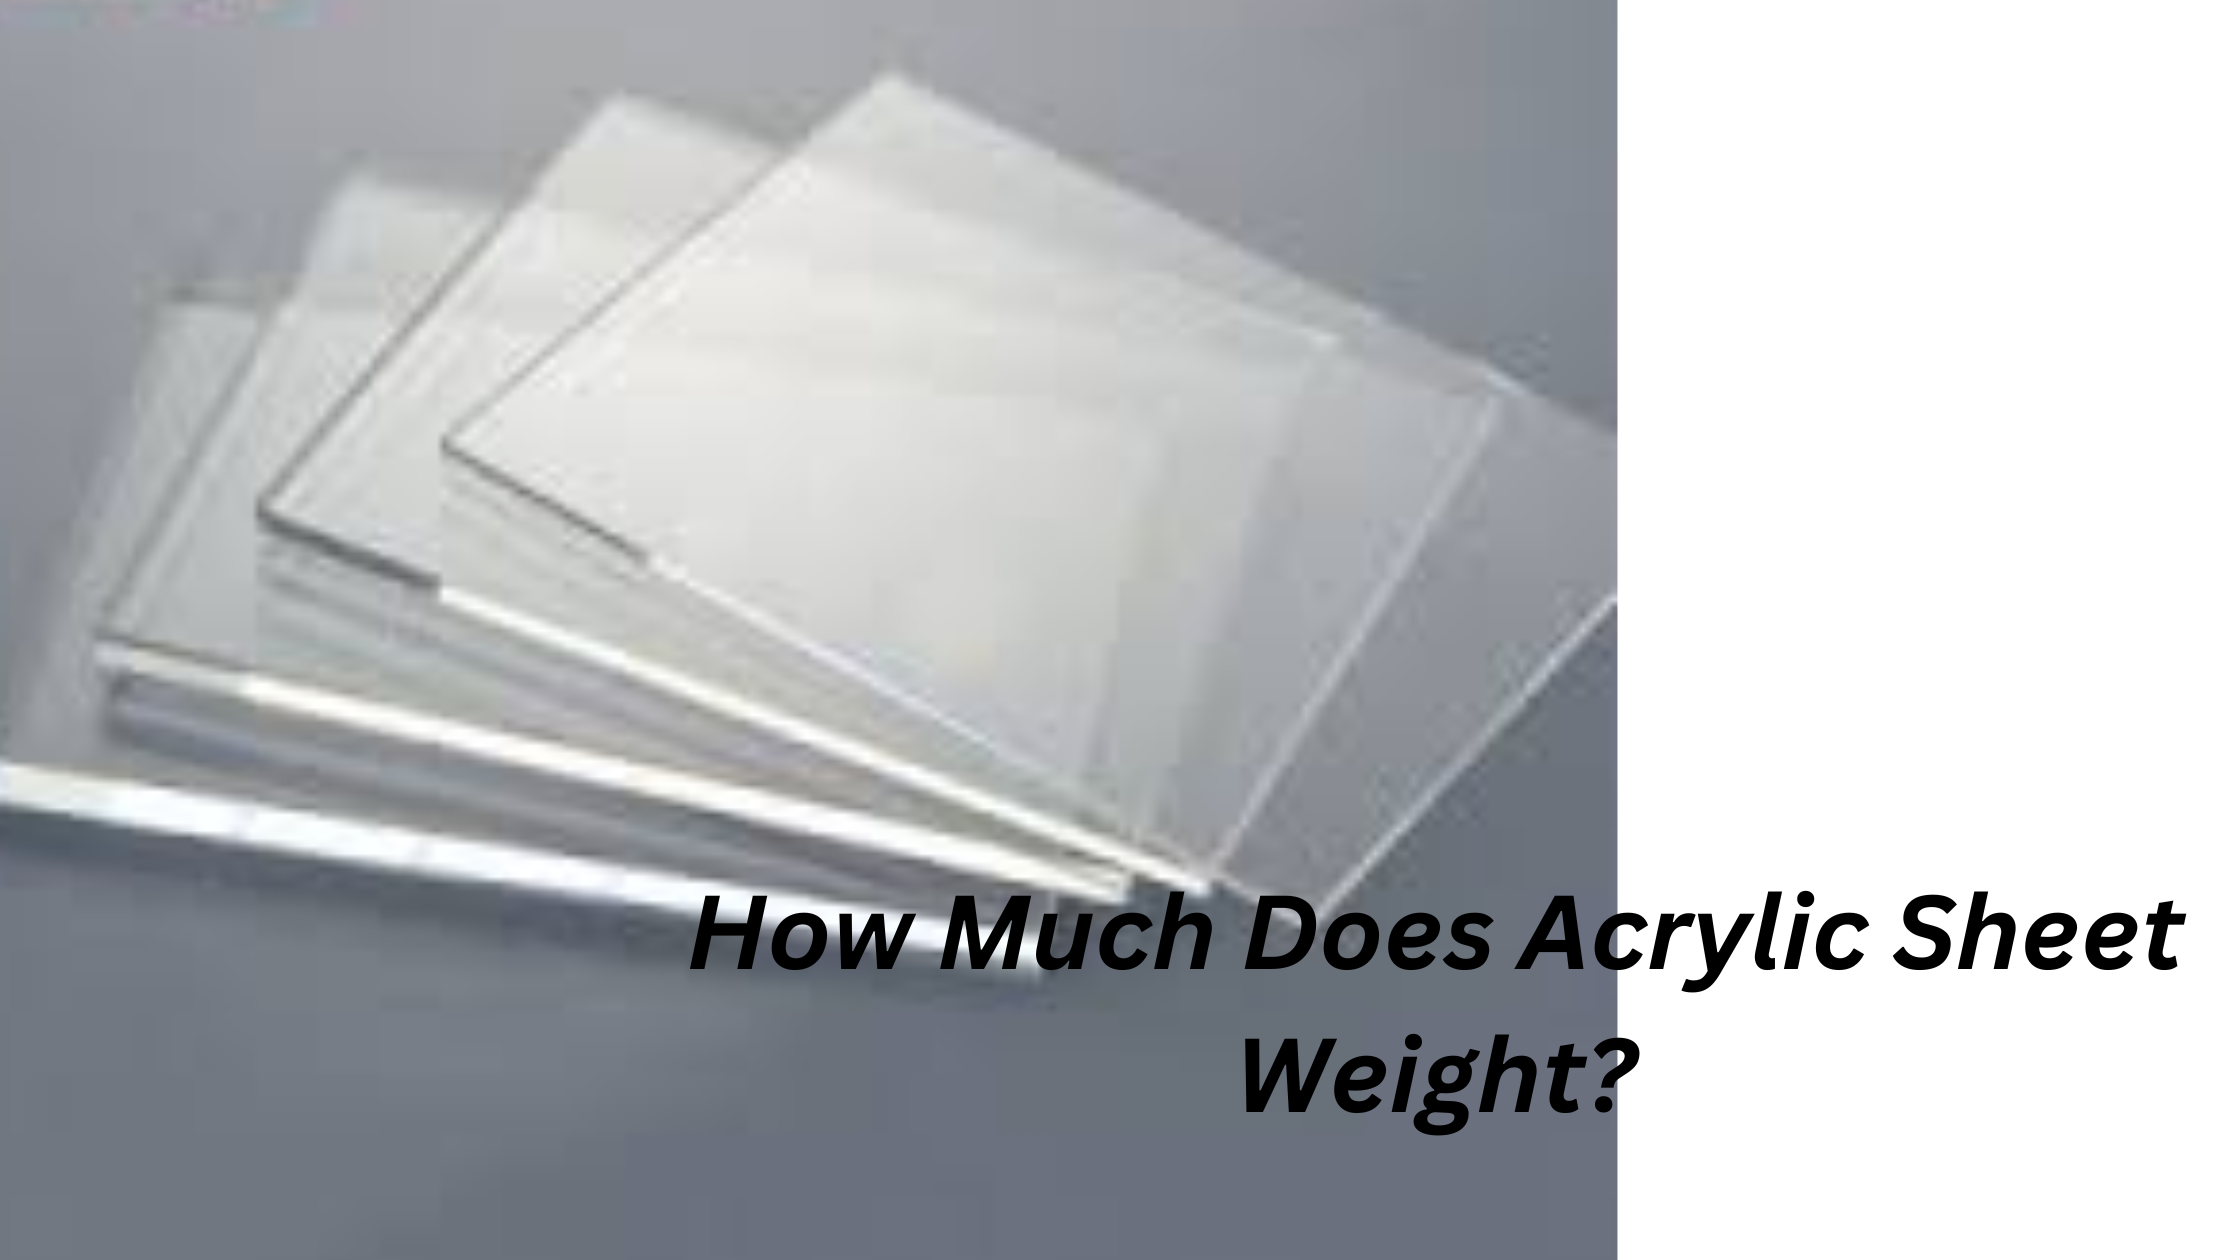 How Much Does Acrylic Sheet Weight?